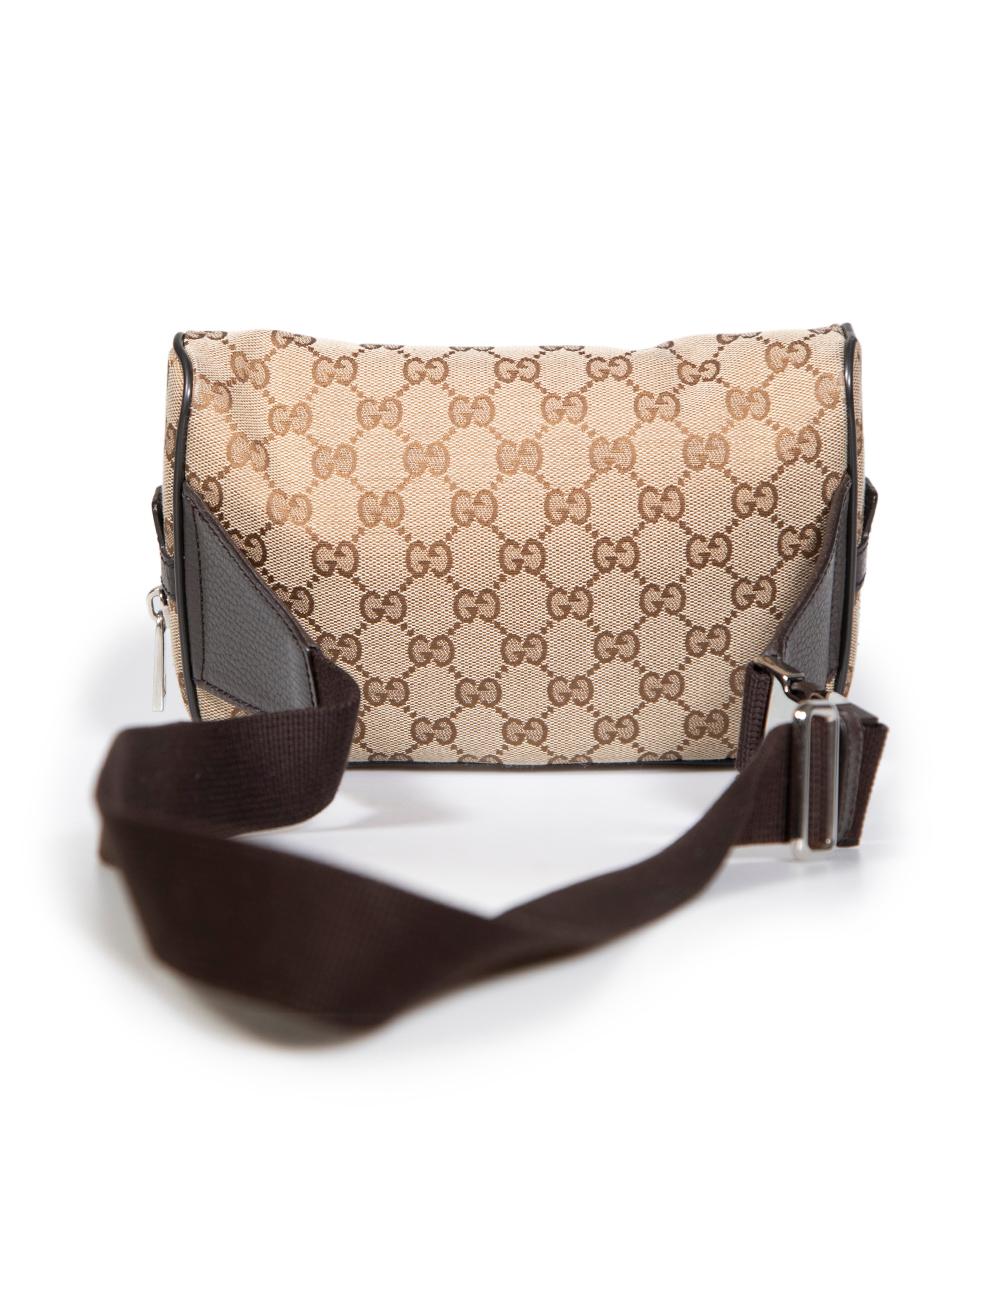 Gucci Brown GG Guccissima Waist Belt Bag In Good Condition For Sale In London, GB